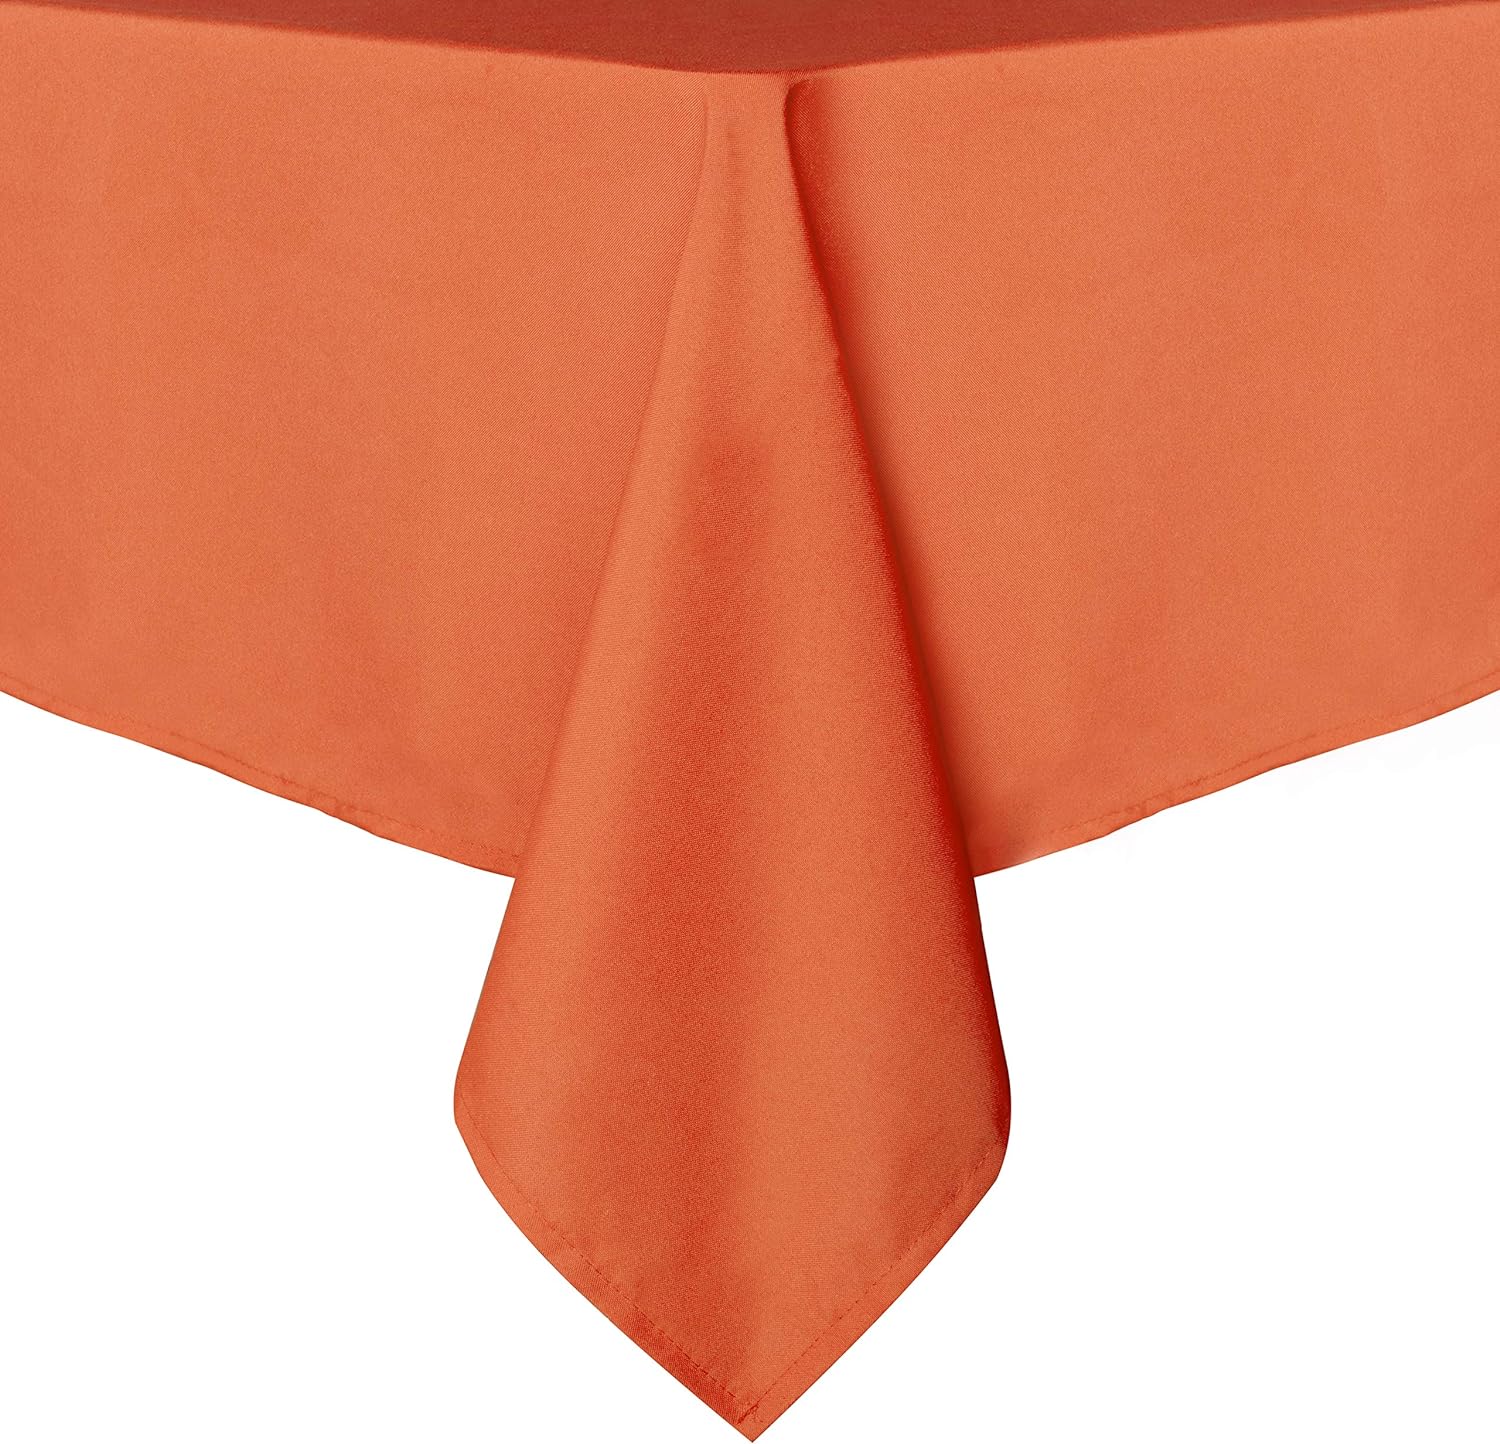 sancua Rectangle Tablecloth - 60 x 84 Inch - Stain and Wrinkle Resistant Washable Polyester Table Cloth, Decorative Fabric Table Cover for Dining Table, Buffet Parties and Camping, Orange